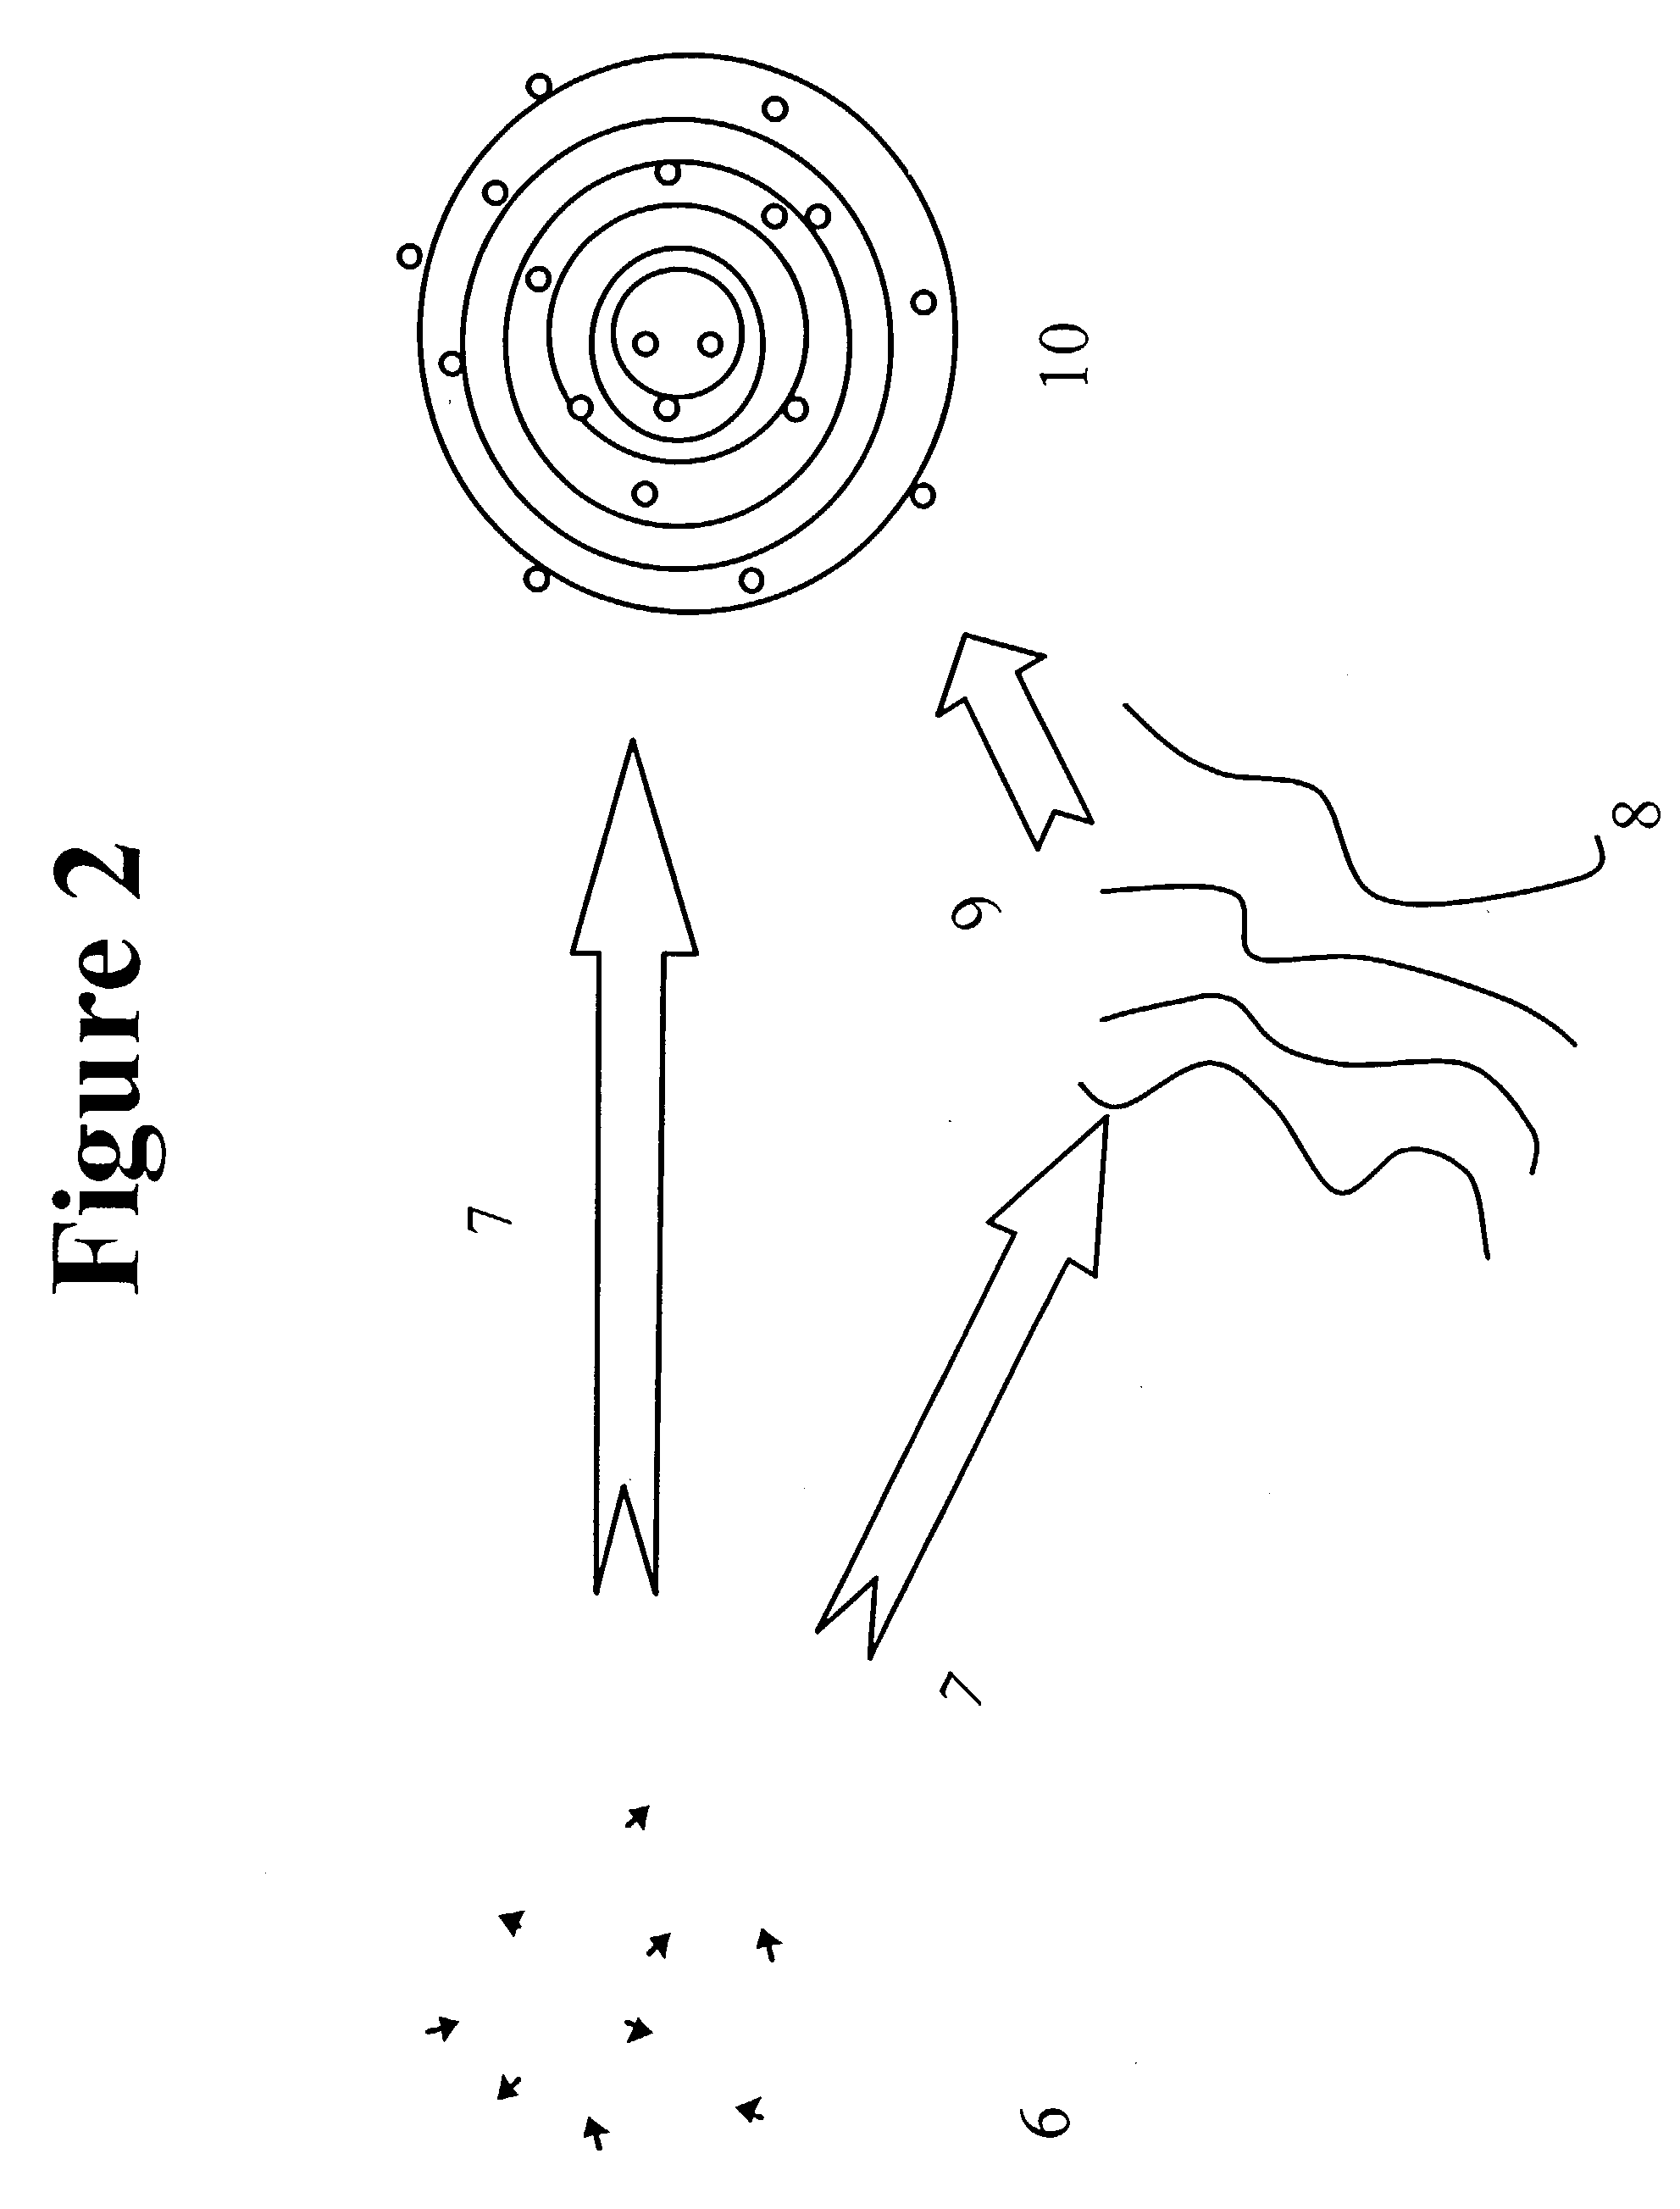 Methods for entrapment of bioactive agent in a liposome or lipid complex